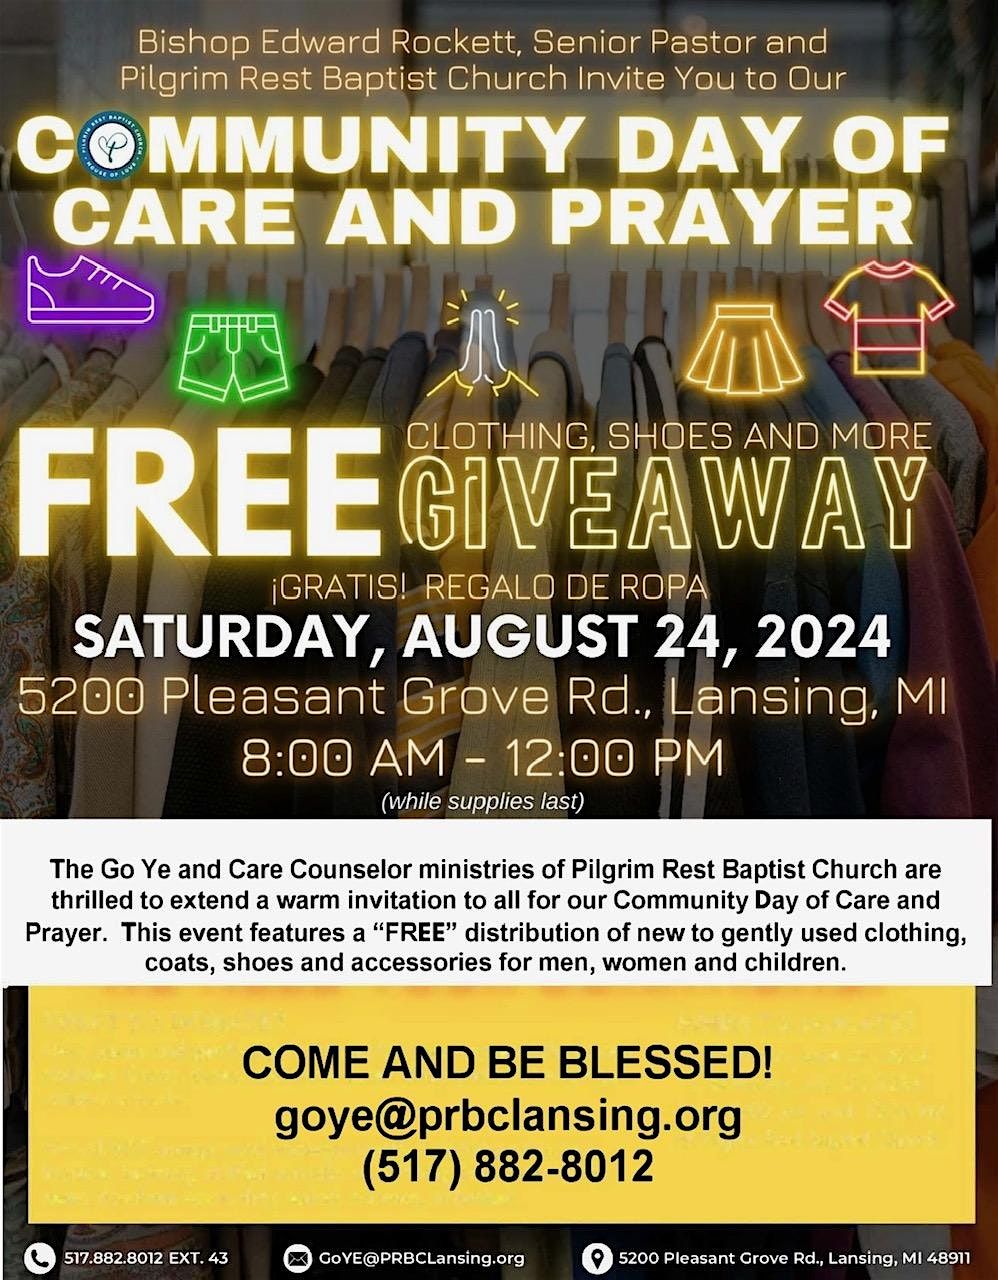 Community Day of Care and Prayer, Free Clothing, Shoes, and More Giveaway